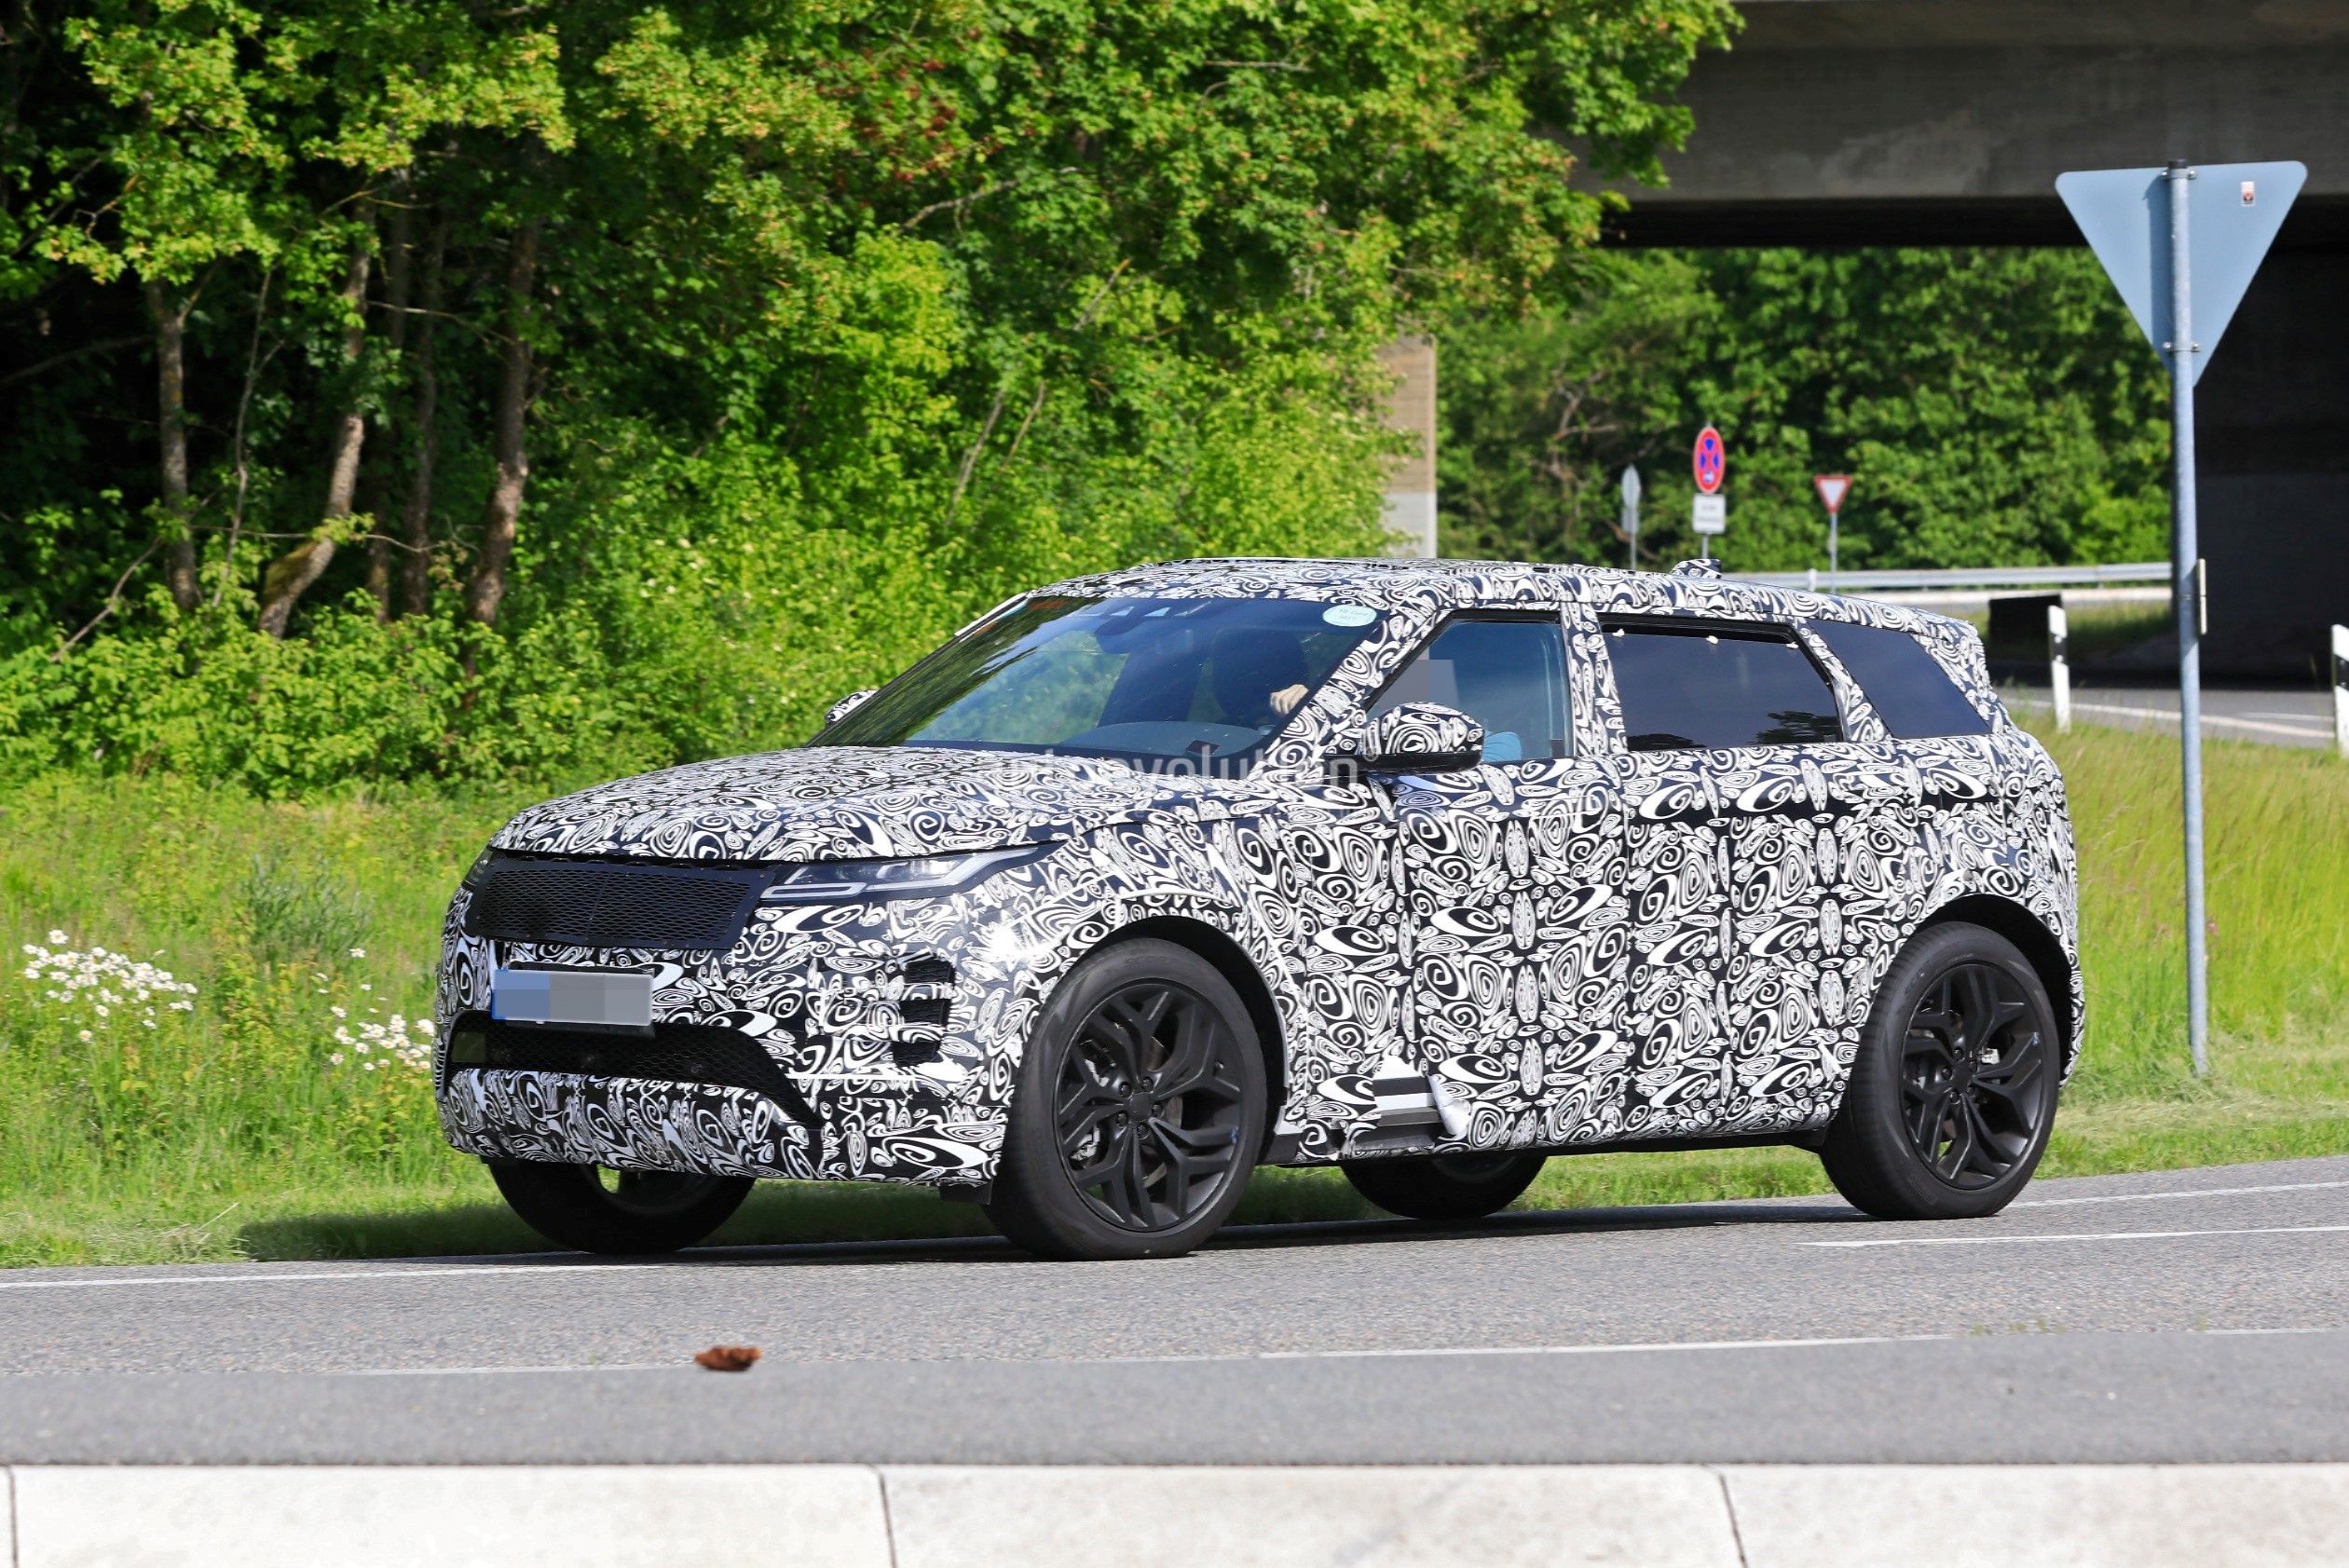 A LWB version of the 2022 Range Rover Evoque spotted testing.